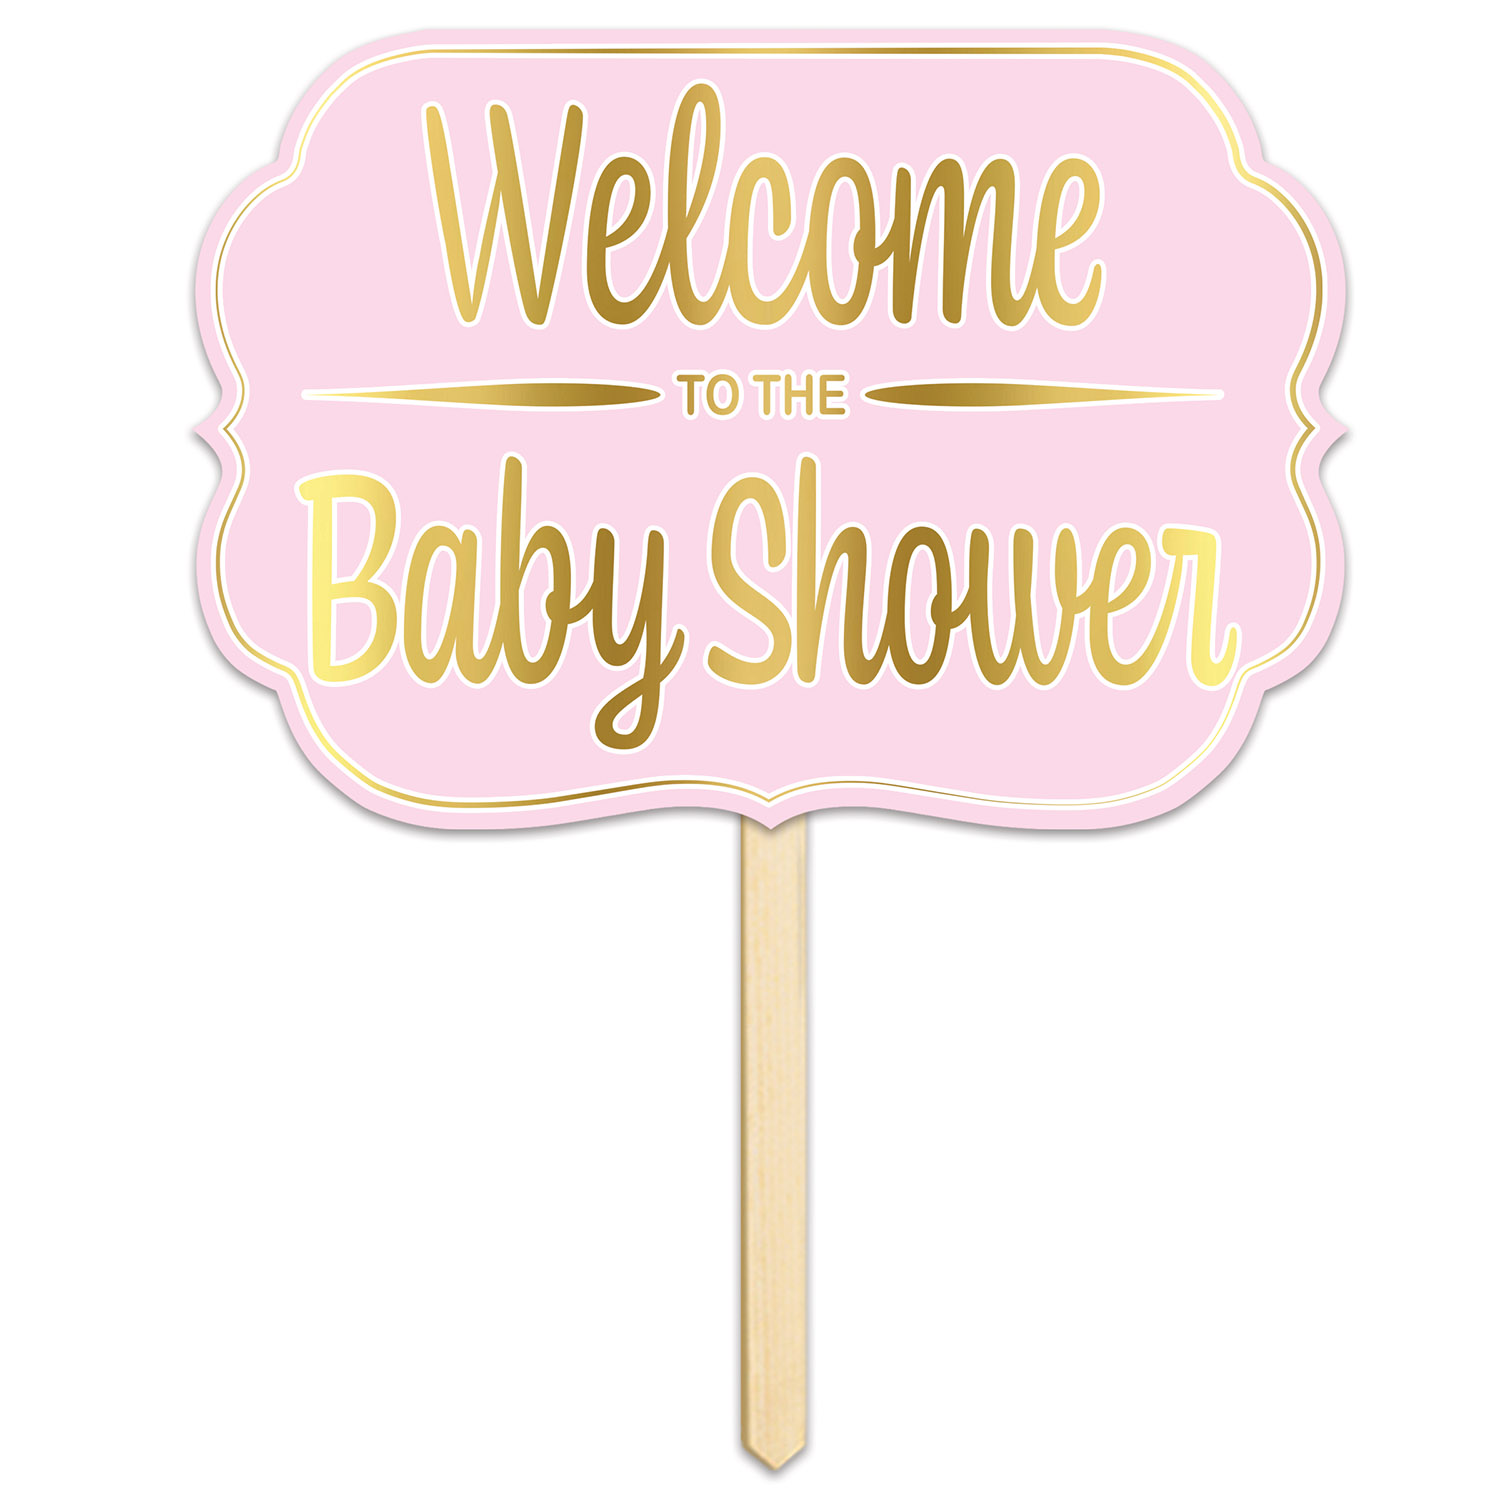 Foil Welcome ToThe Baby Shower Yard SIGN